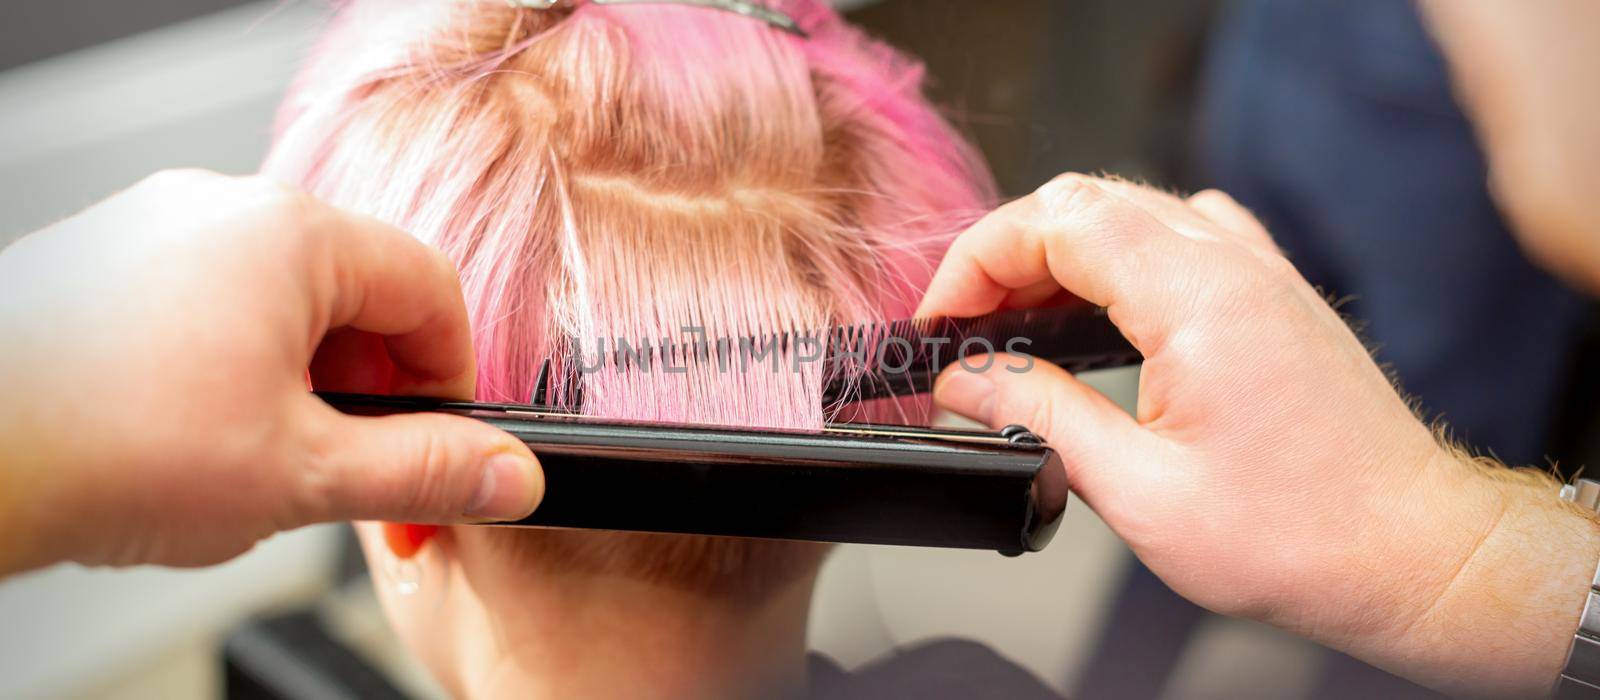 Close up back view of hairdresser's hands straightening short pink hair with a hair iron straightener in a hair salon